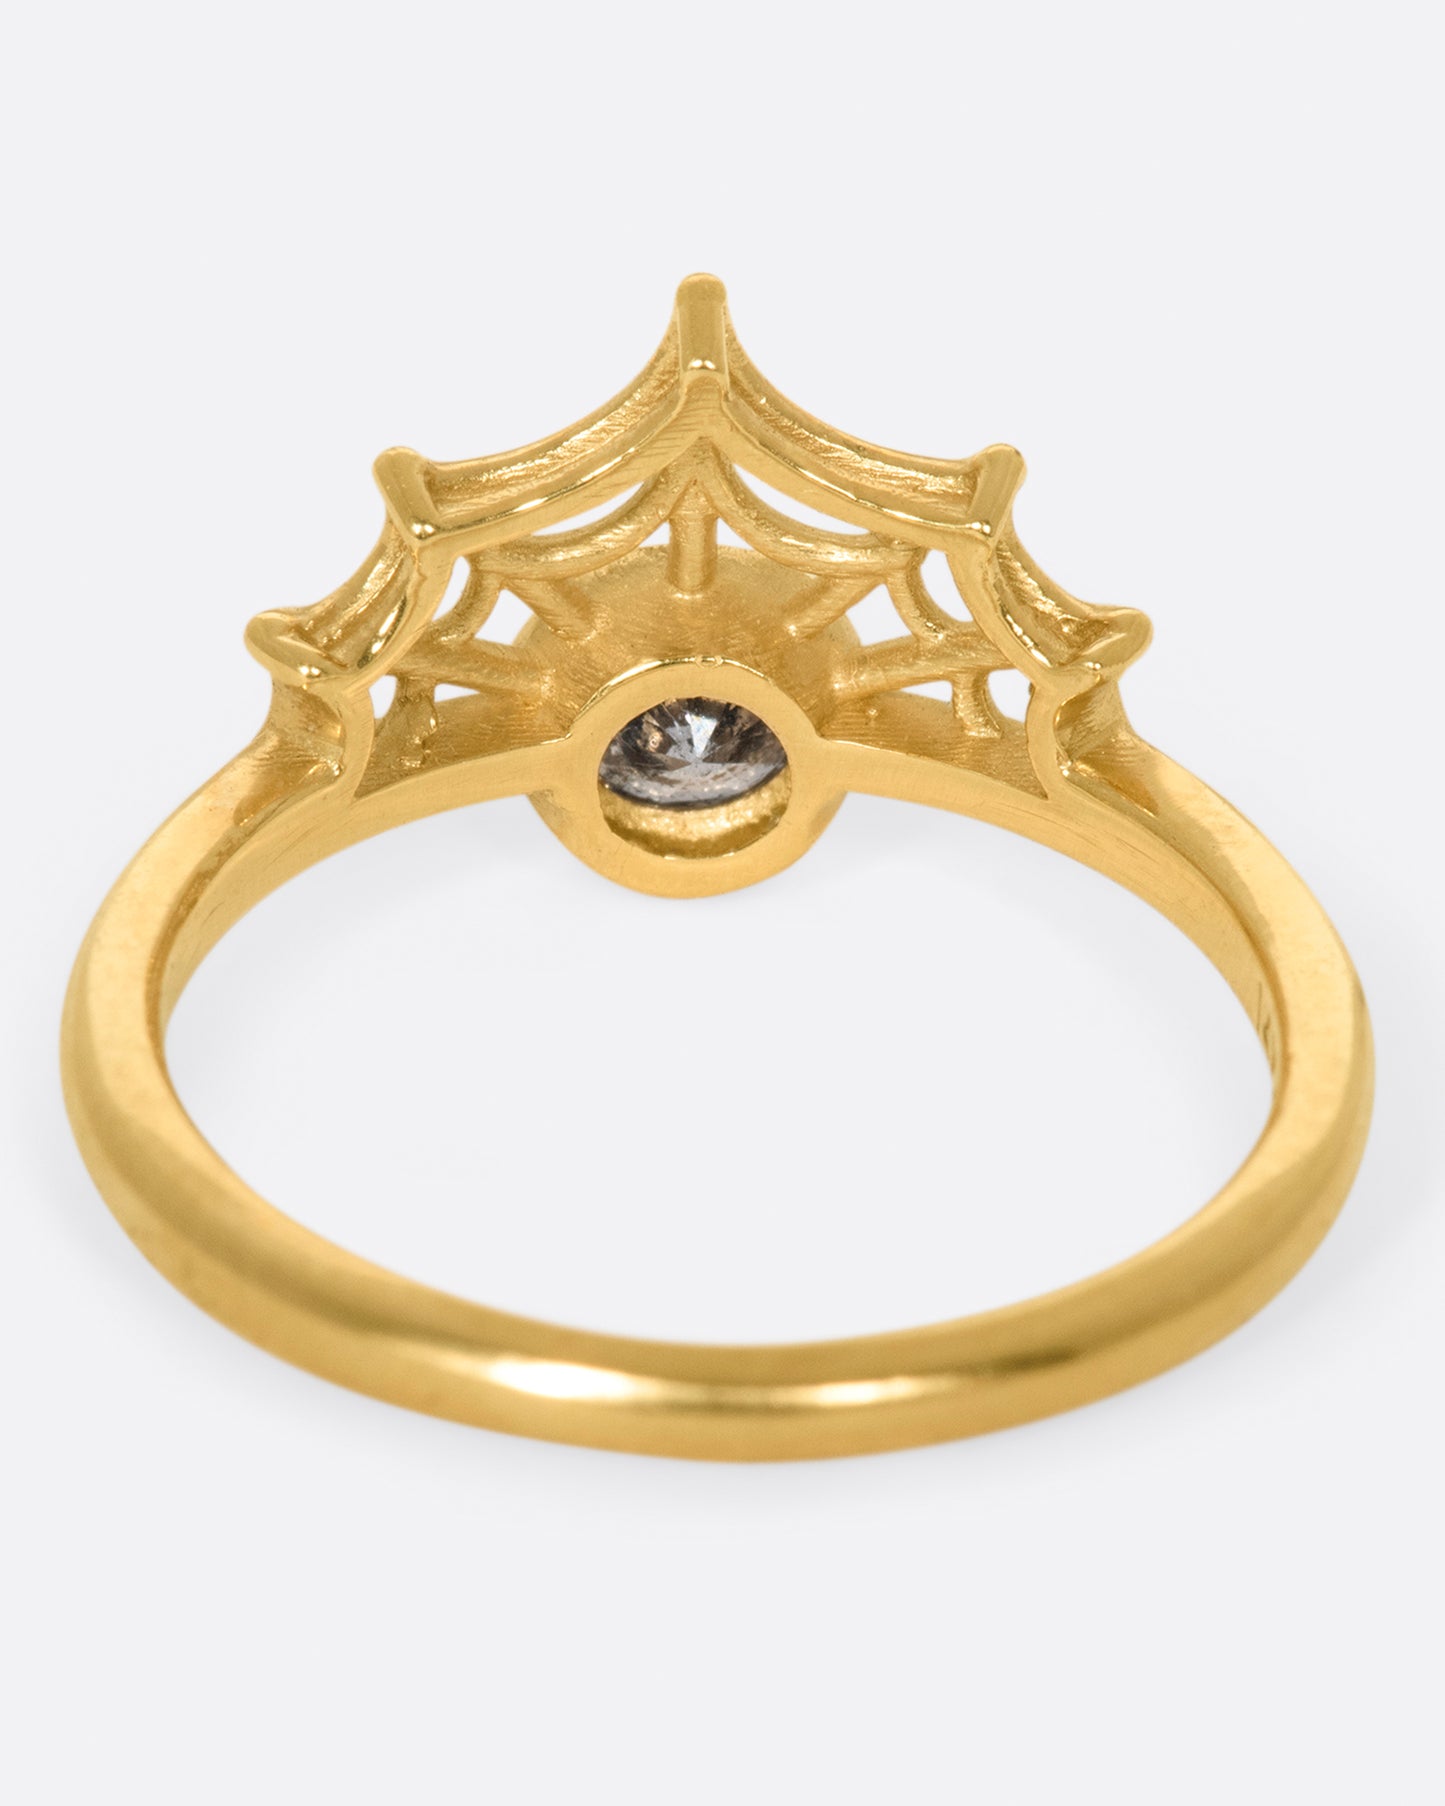 in a yellow gold witchy ring, a grey diamond is bezel set in the middle, with an arched spider web on one side of the diamond.